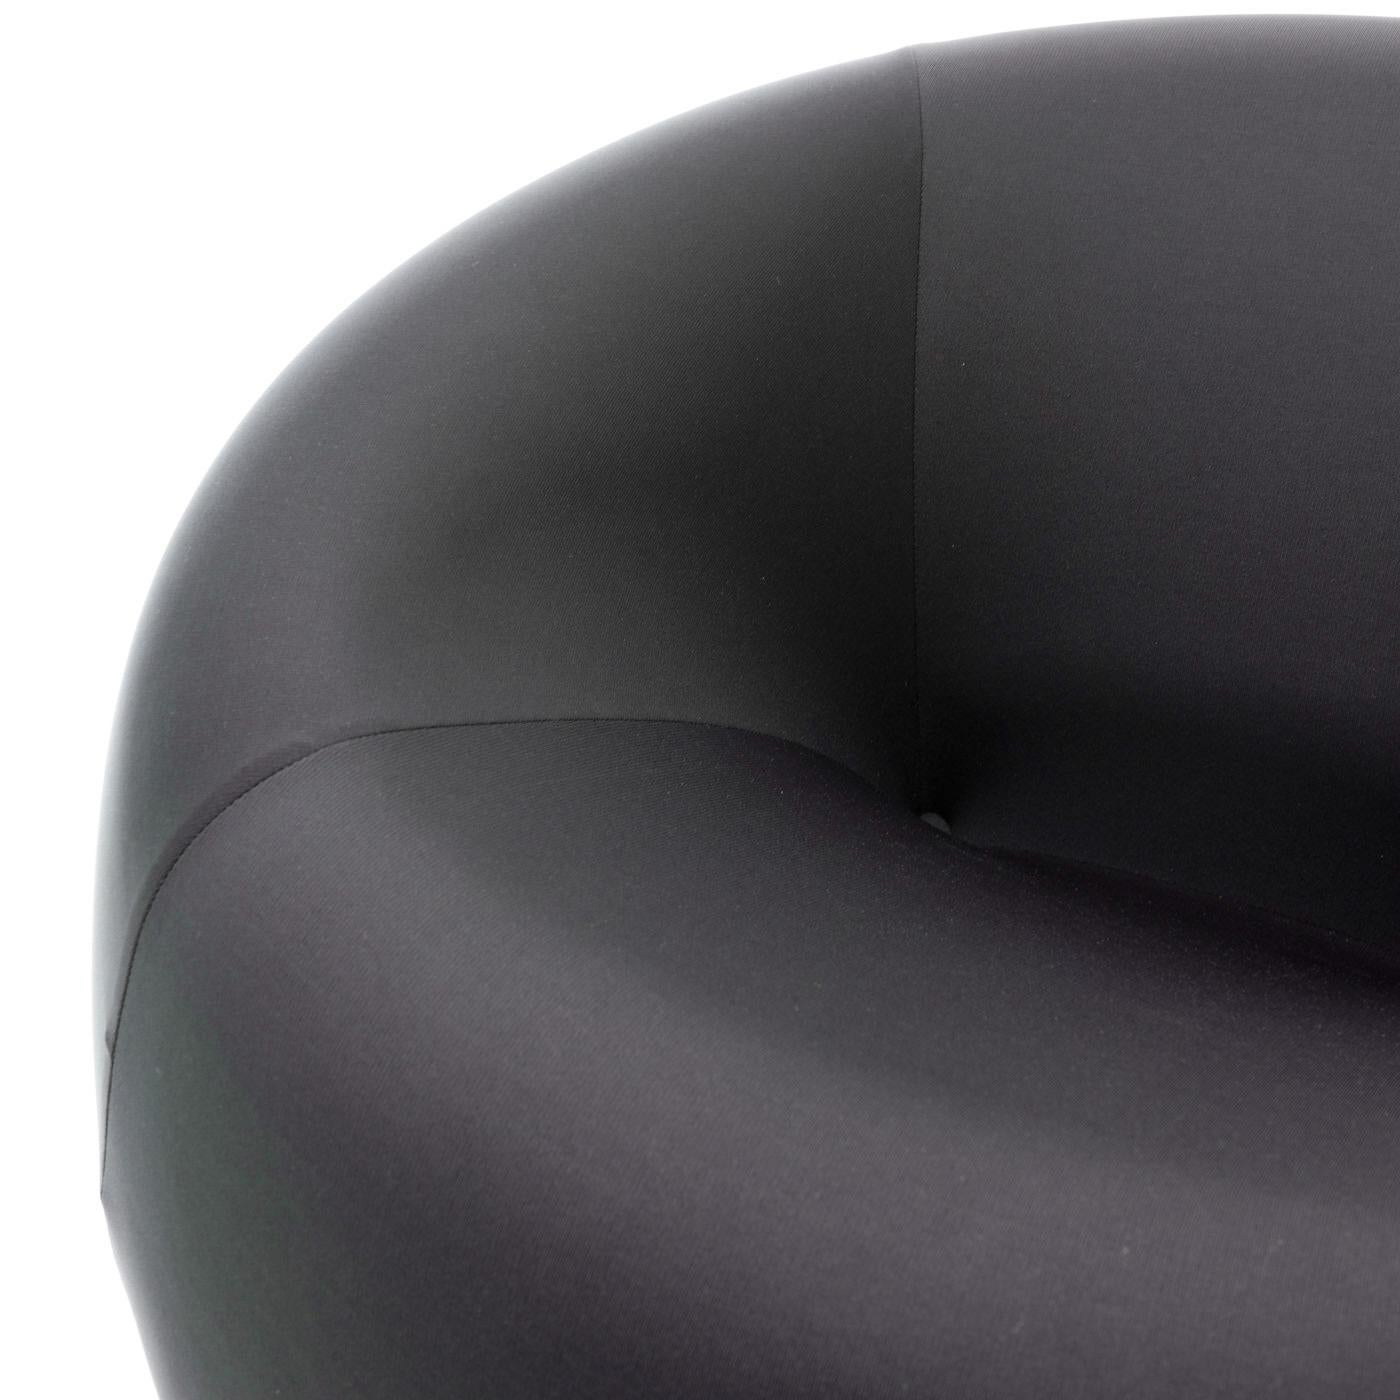 UP1 Lounge Chairs, designed  in 1969 by Gaetano Pesce for C&B Italia (now B&B Italia):

These lounge chairs are known for their distinctive, sculptural round form, and due to their structure being completely built up from polyurethane foam, they are